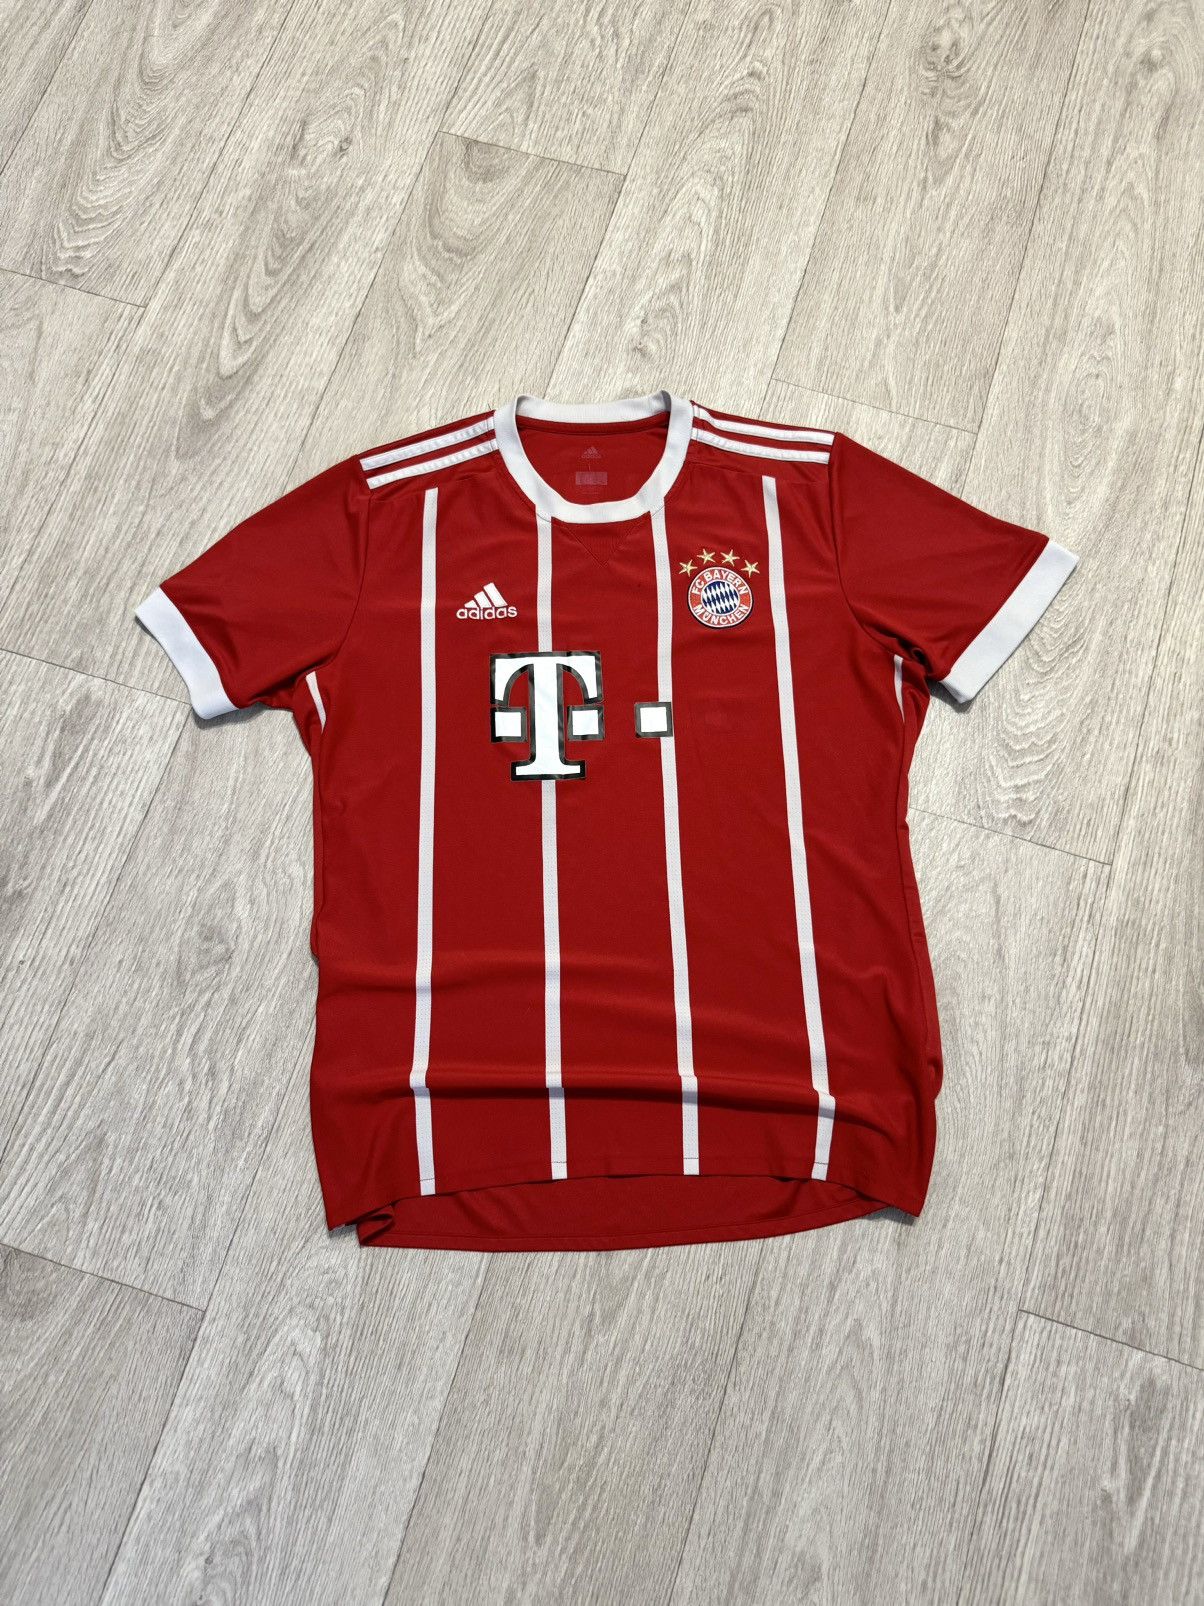 Pre-owned Adidas X Soccer Jersey Vintage Adidas Bayern Munich 2017/18 Soccer Jersey In Red